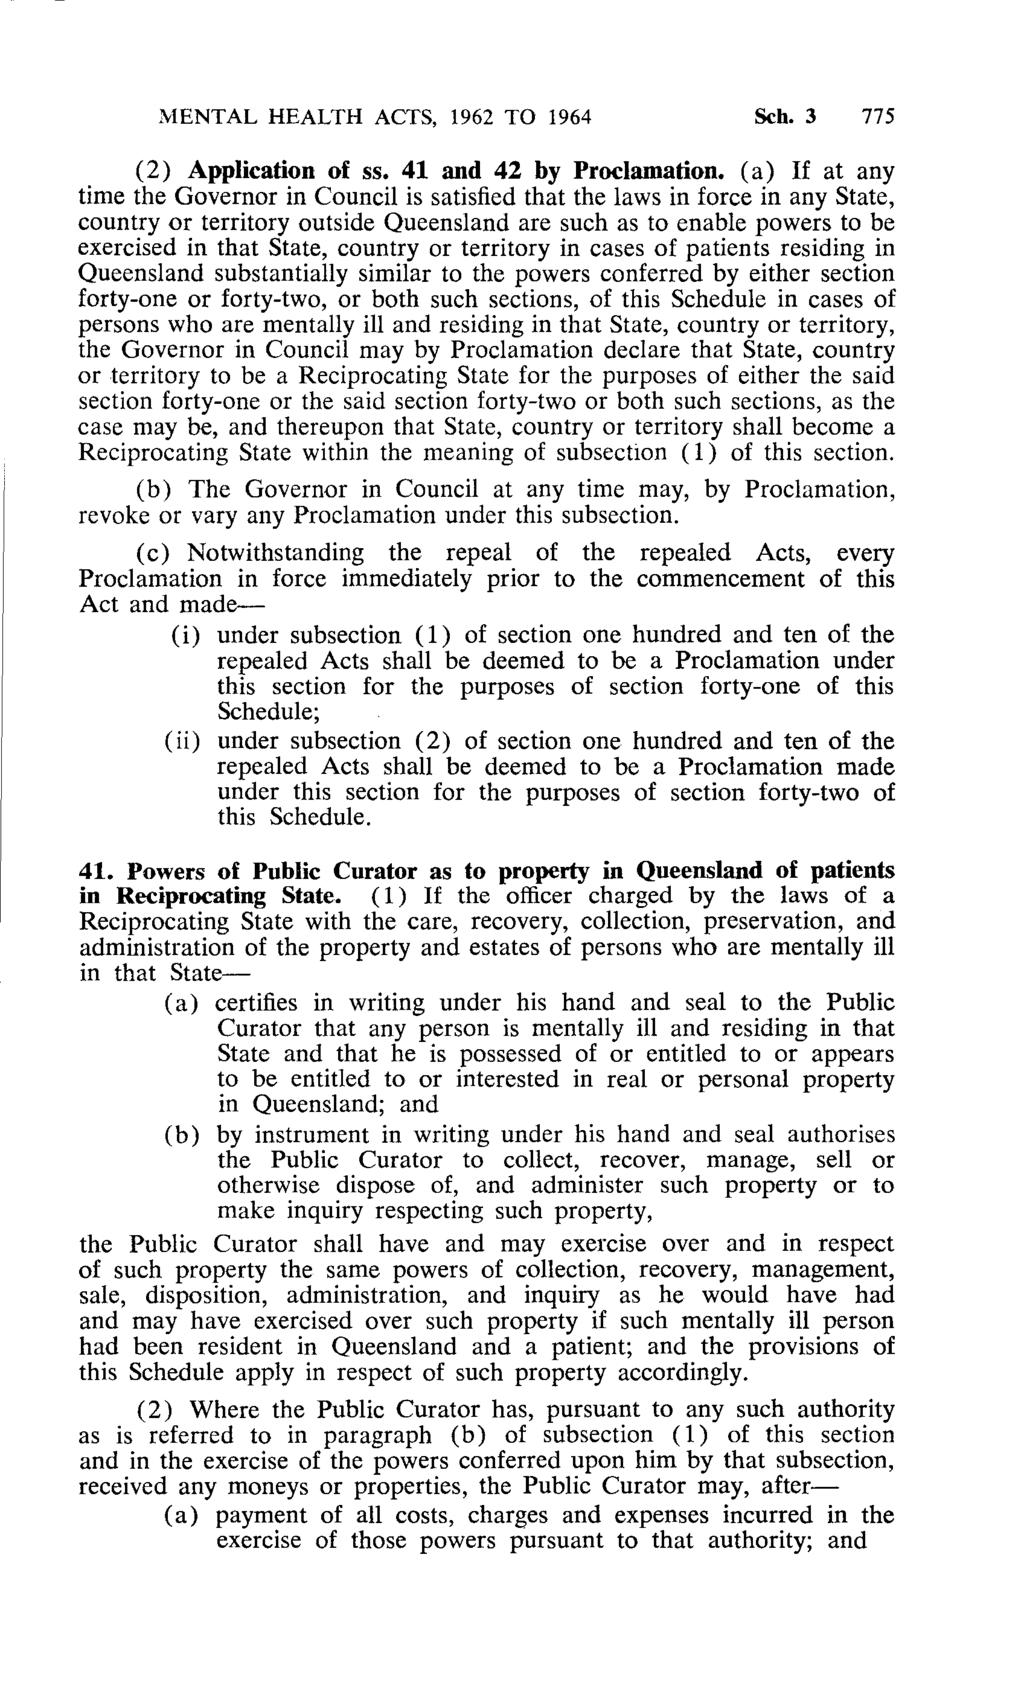 MENTAL HEALTH ACTS, 1962 TO 1964 Sch.3 775 (2) Application of ss. 41 and 42 by Proclamation.